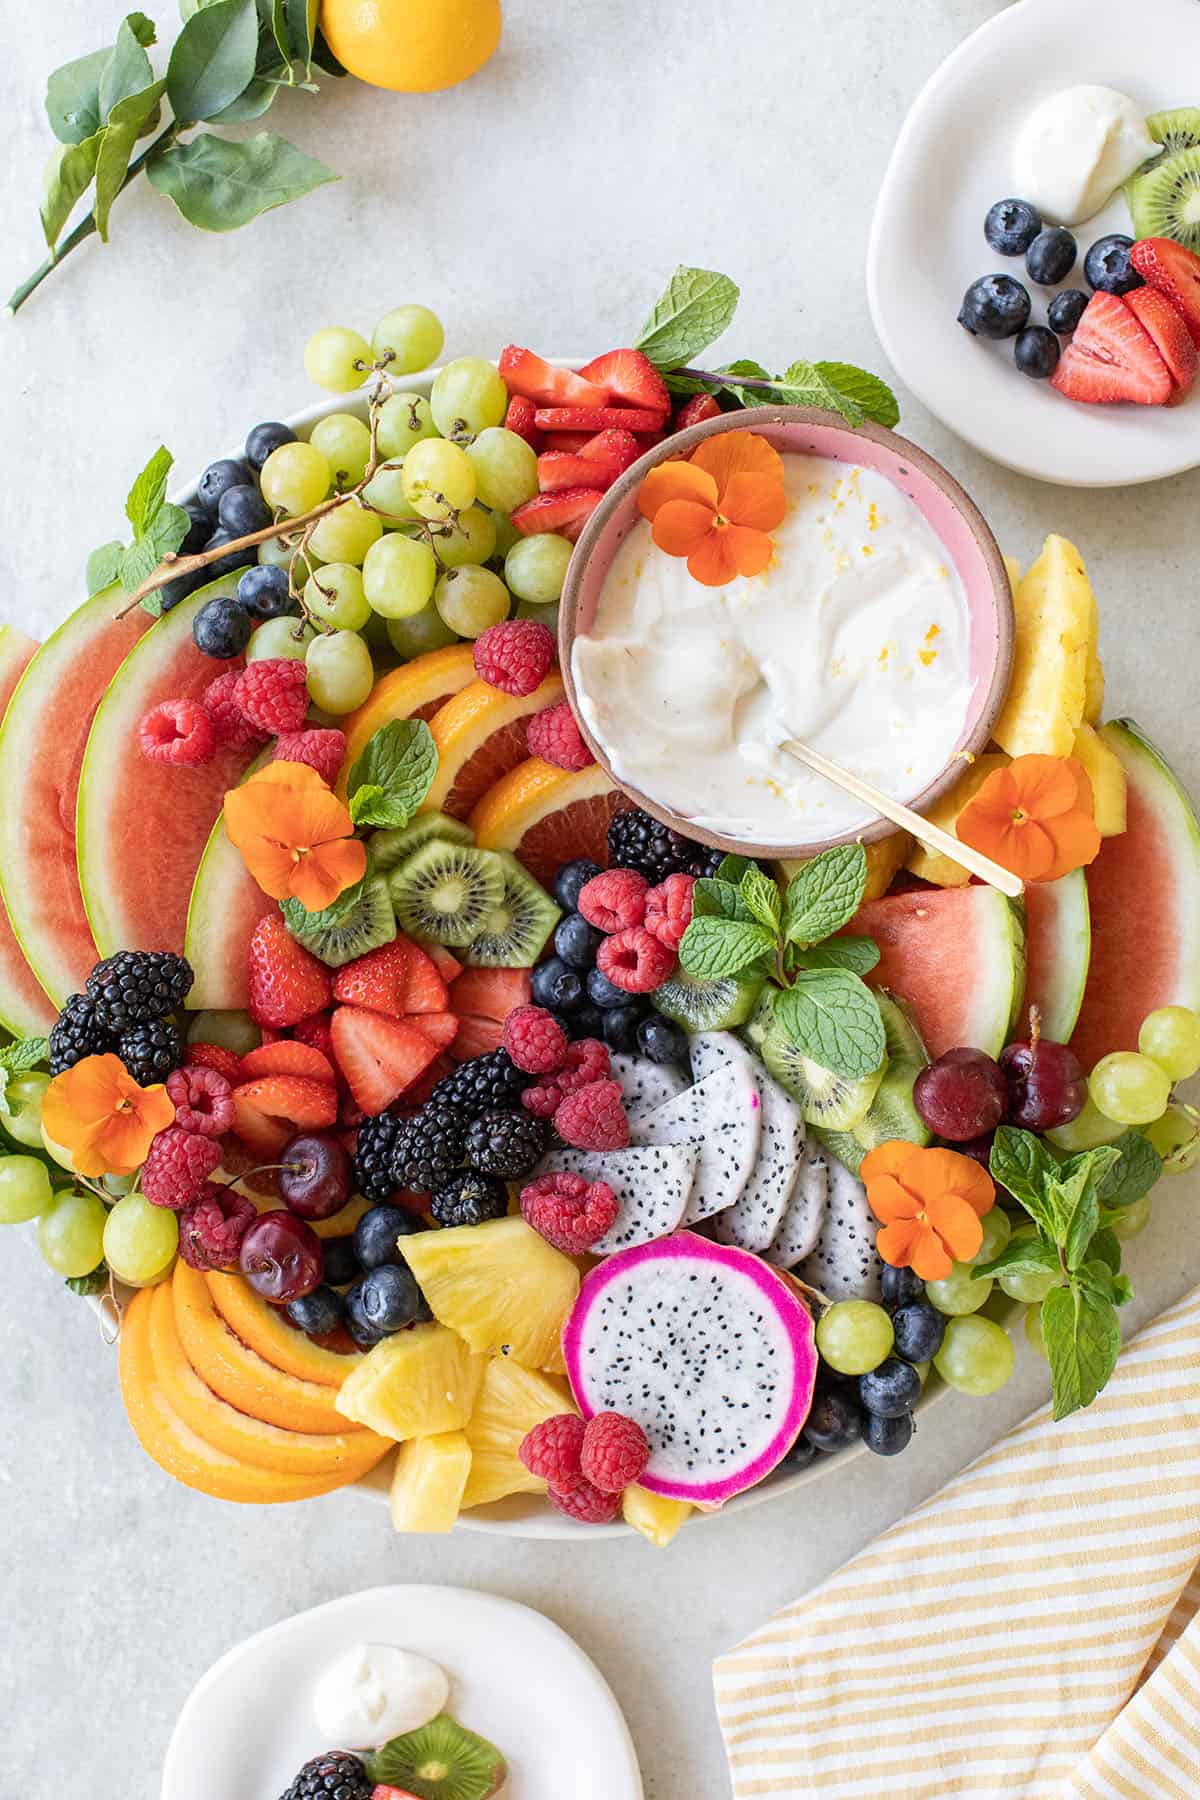 A styled fruit platter for parties.